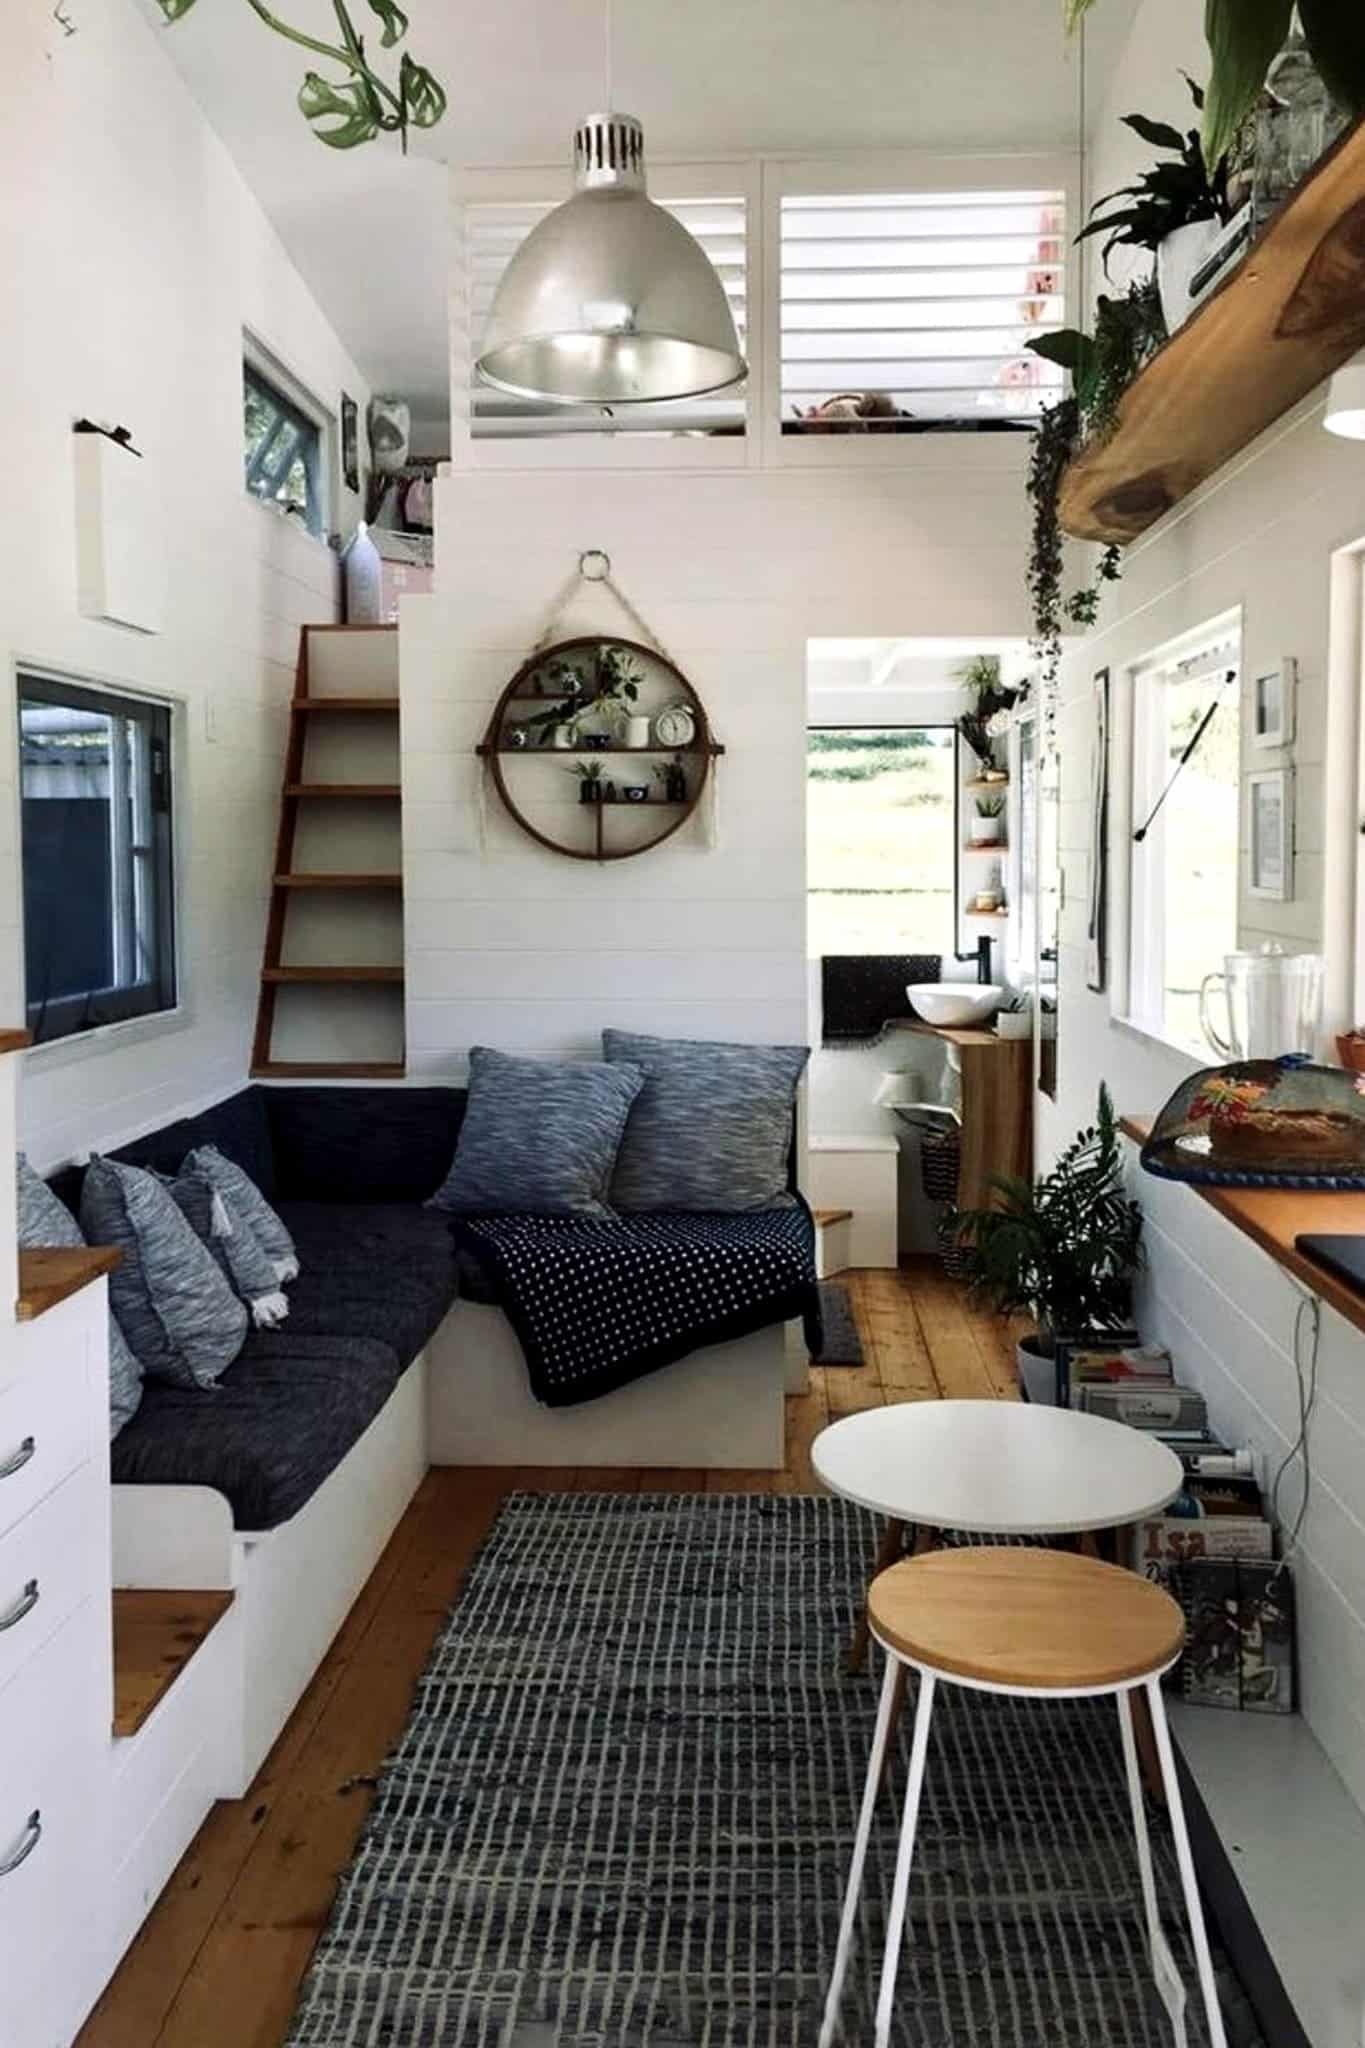 100 Design Hacks To Transform Your Small Space Into A Stylish And Functional Home - 771